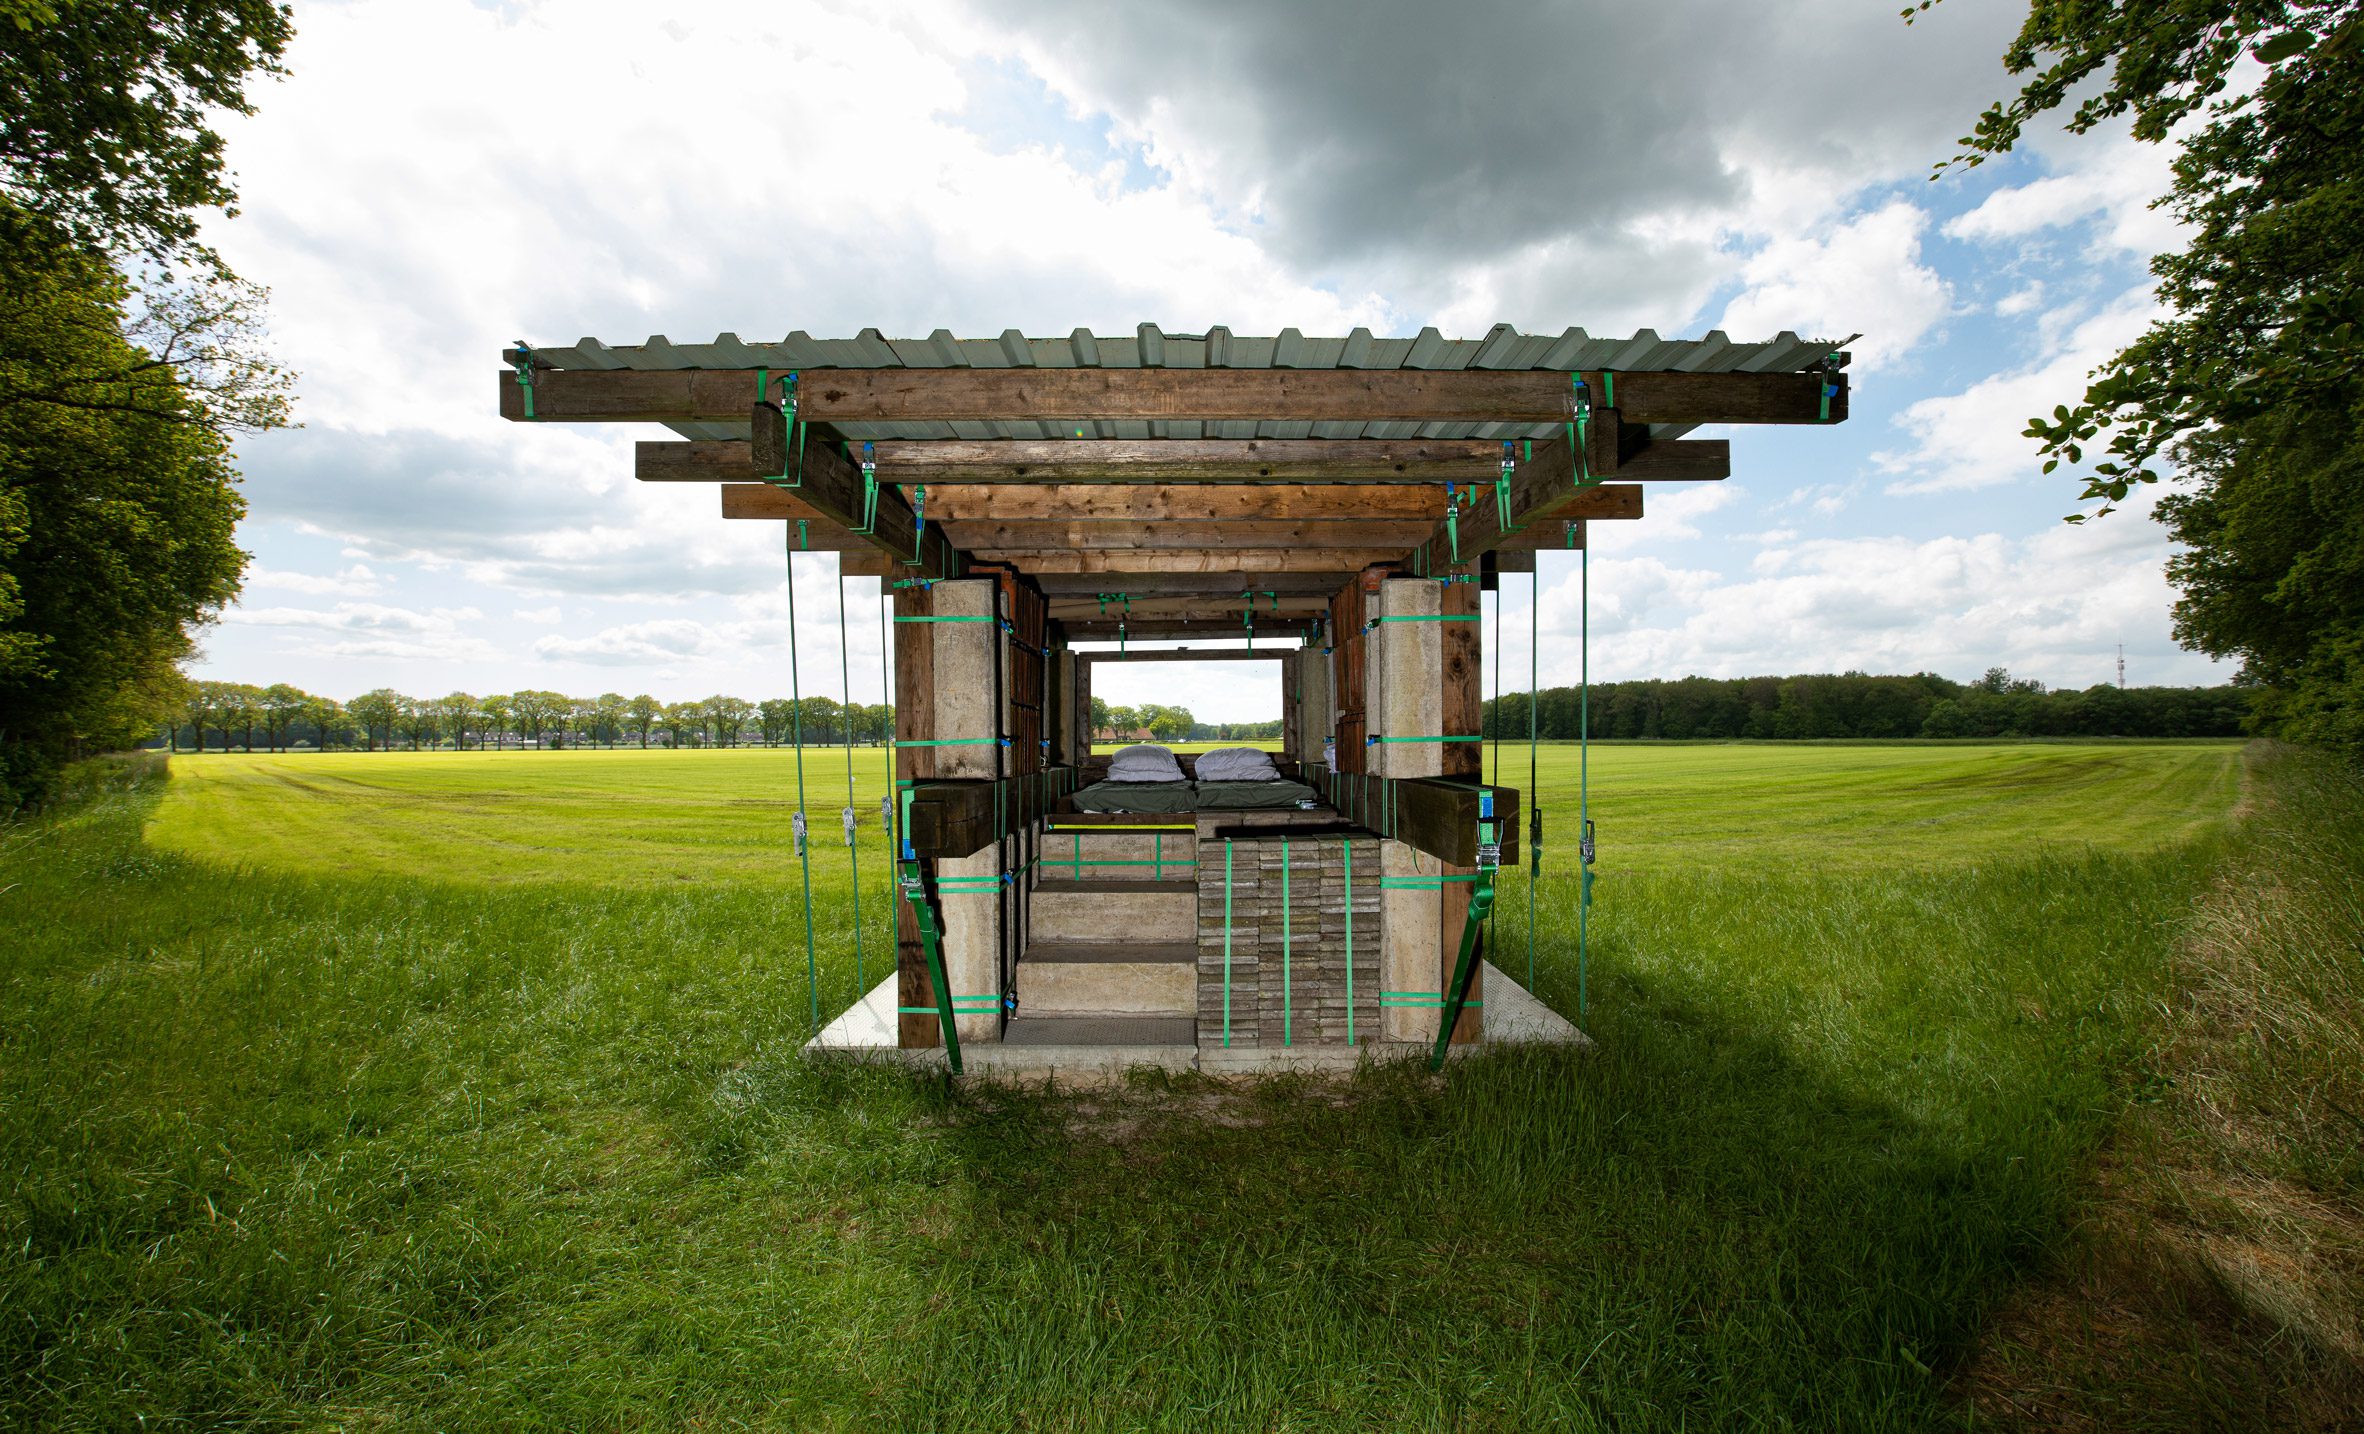 STABLE STACK is a temporary hotel room with a view of farmland, by Overtreders W